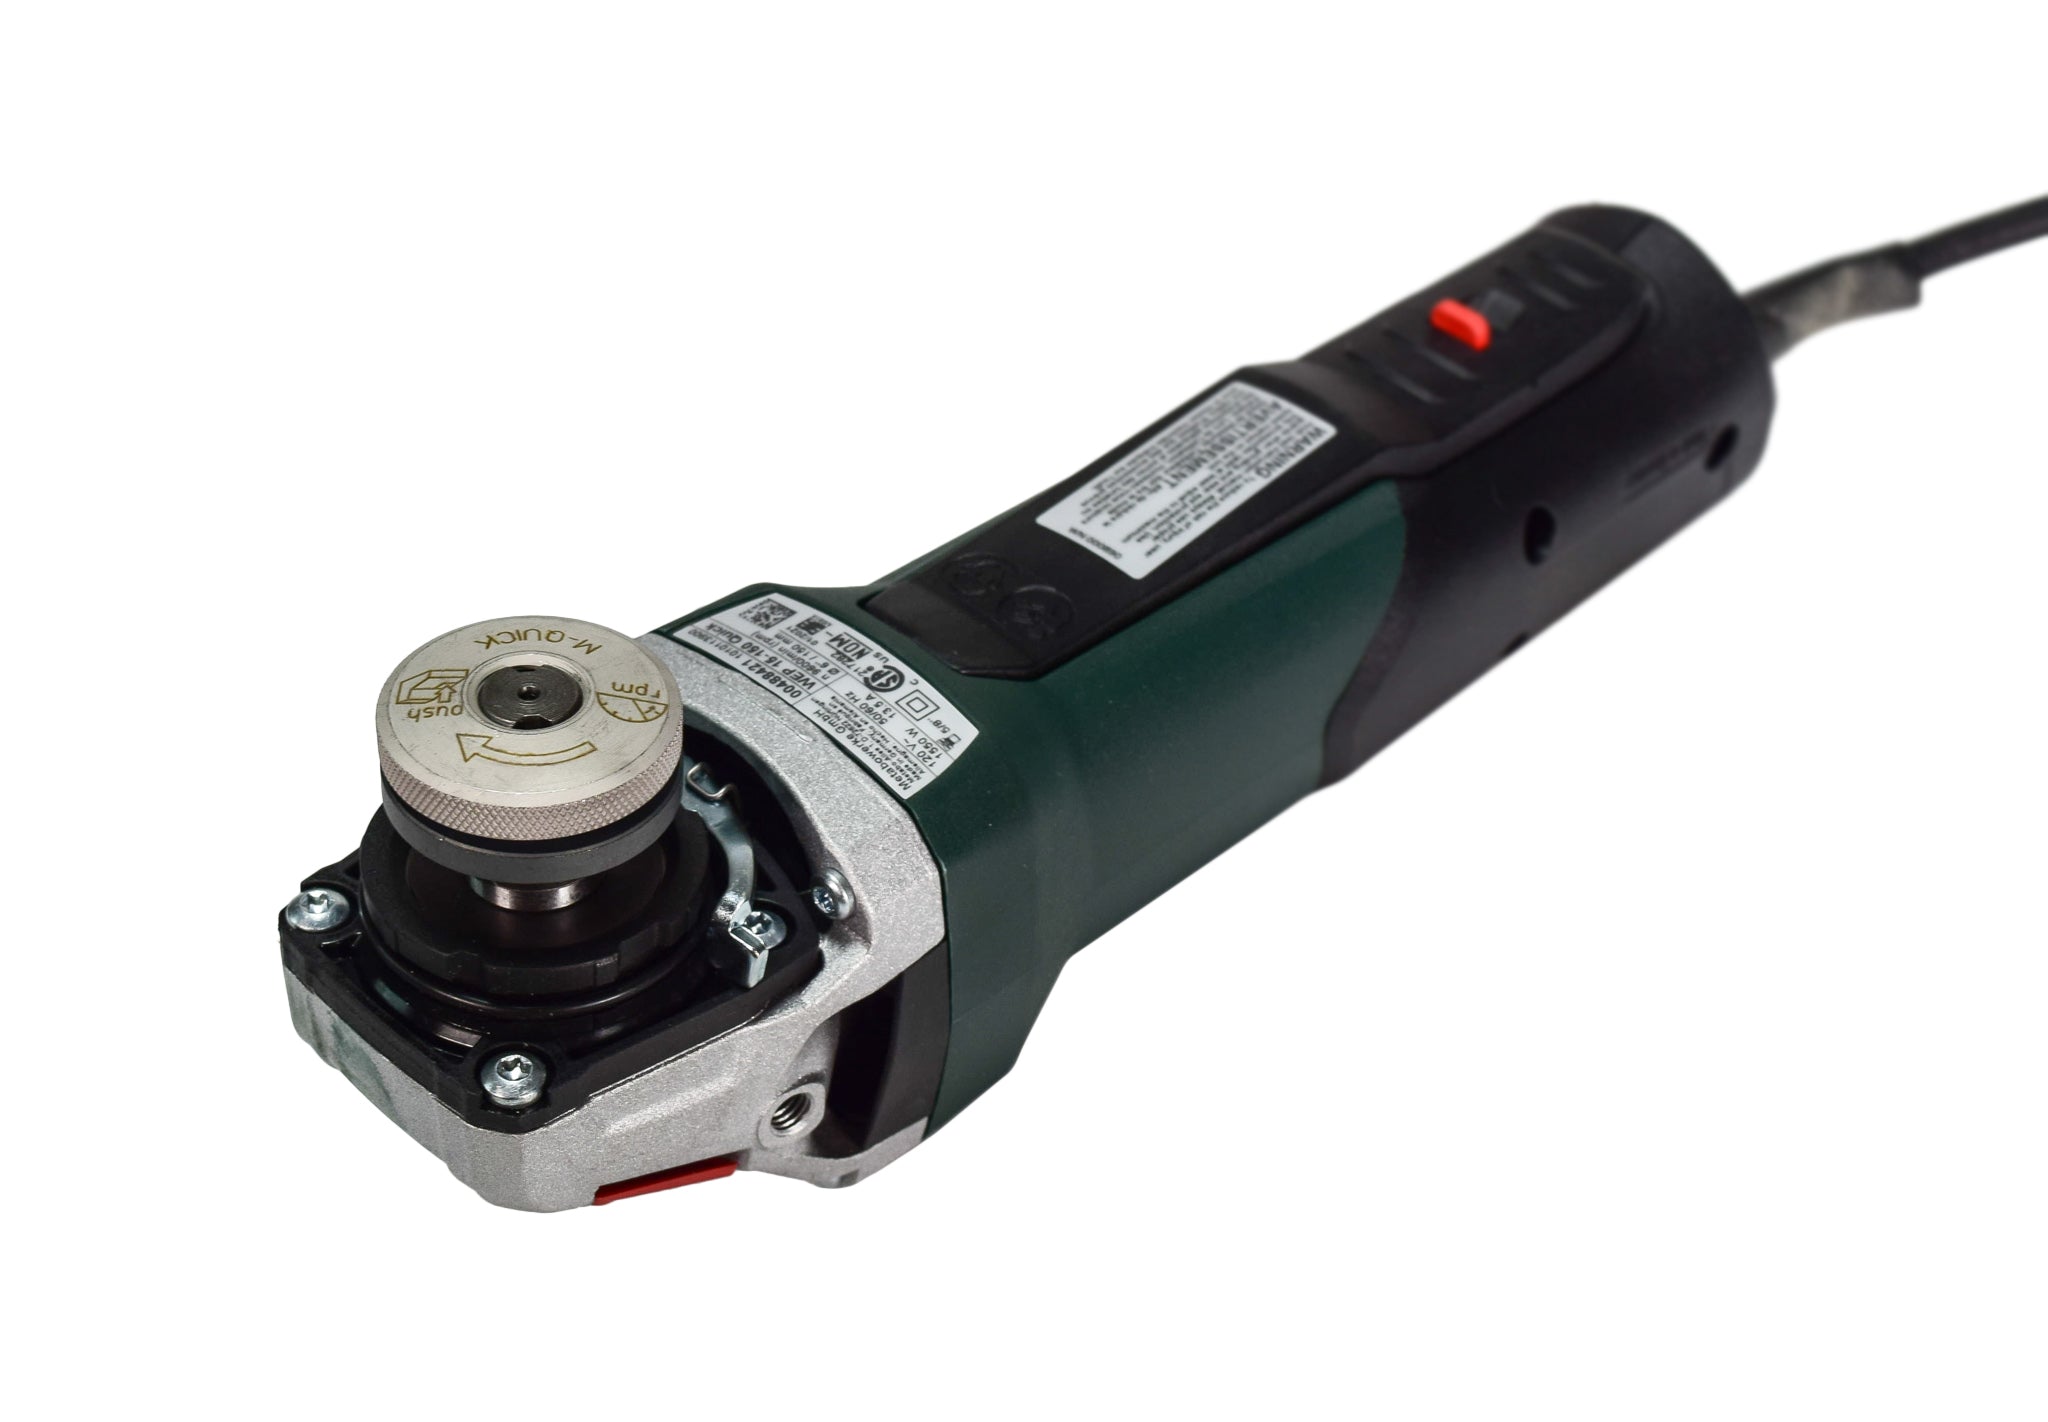 Metabo-600488420-WEP-15-150-Quick-6-Corded-Angle-Grinder-9-600-RPM-13.5-AMP-CLONE-image-11